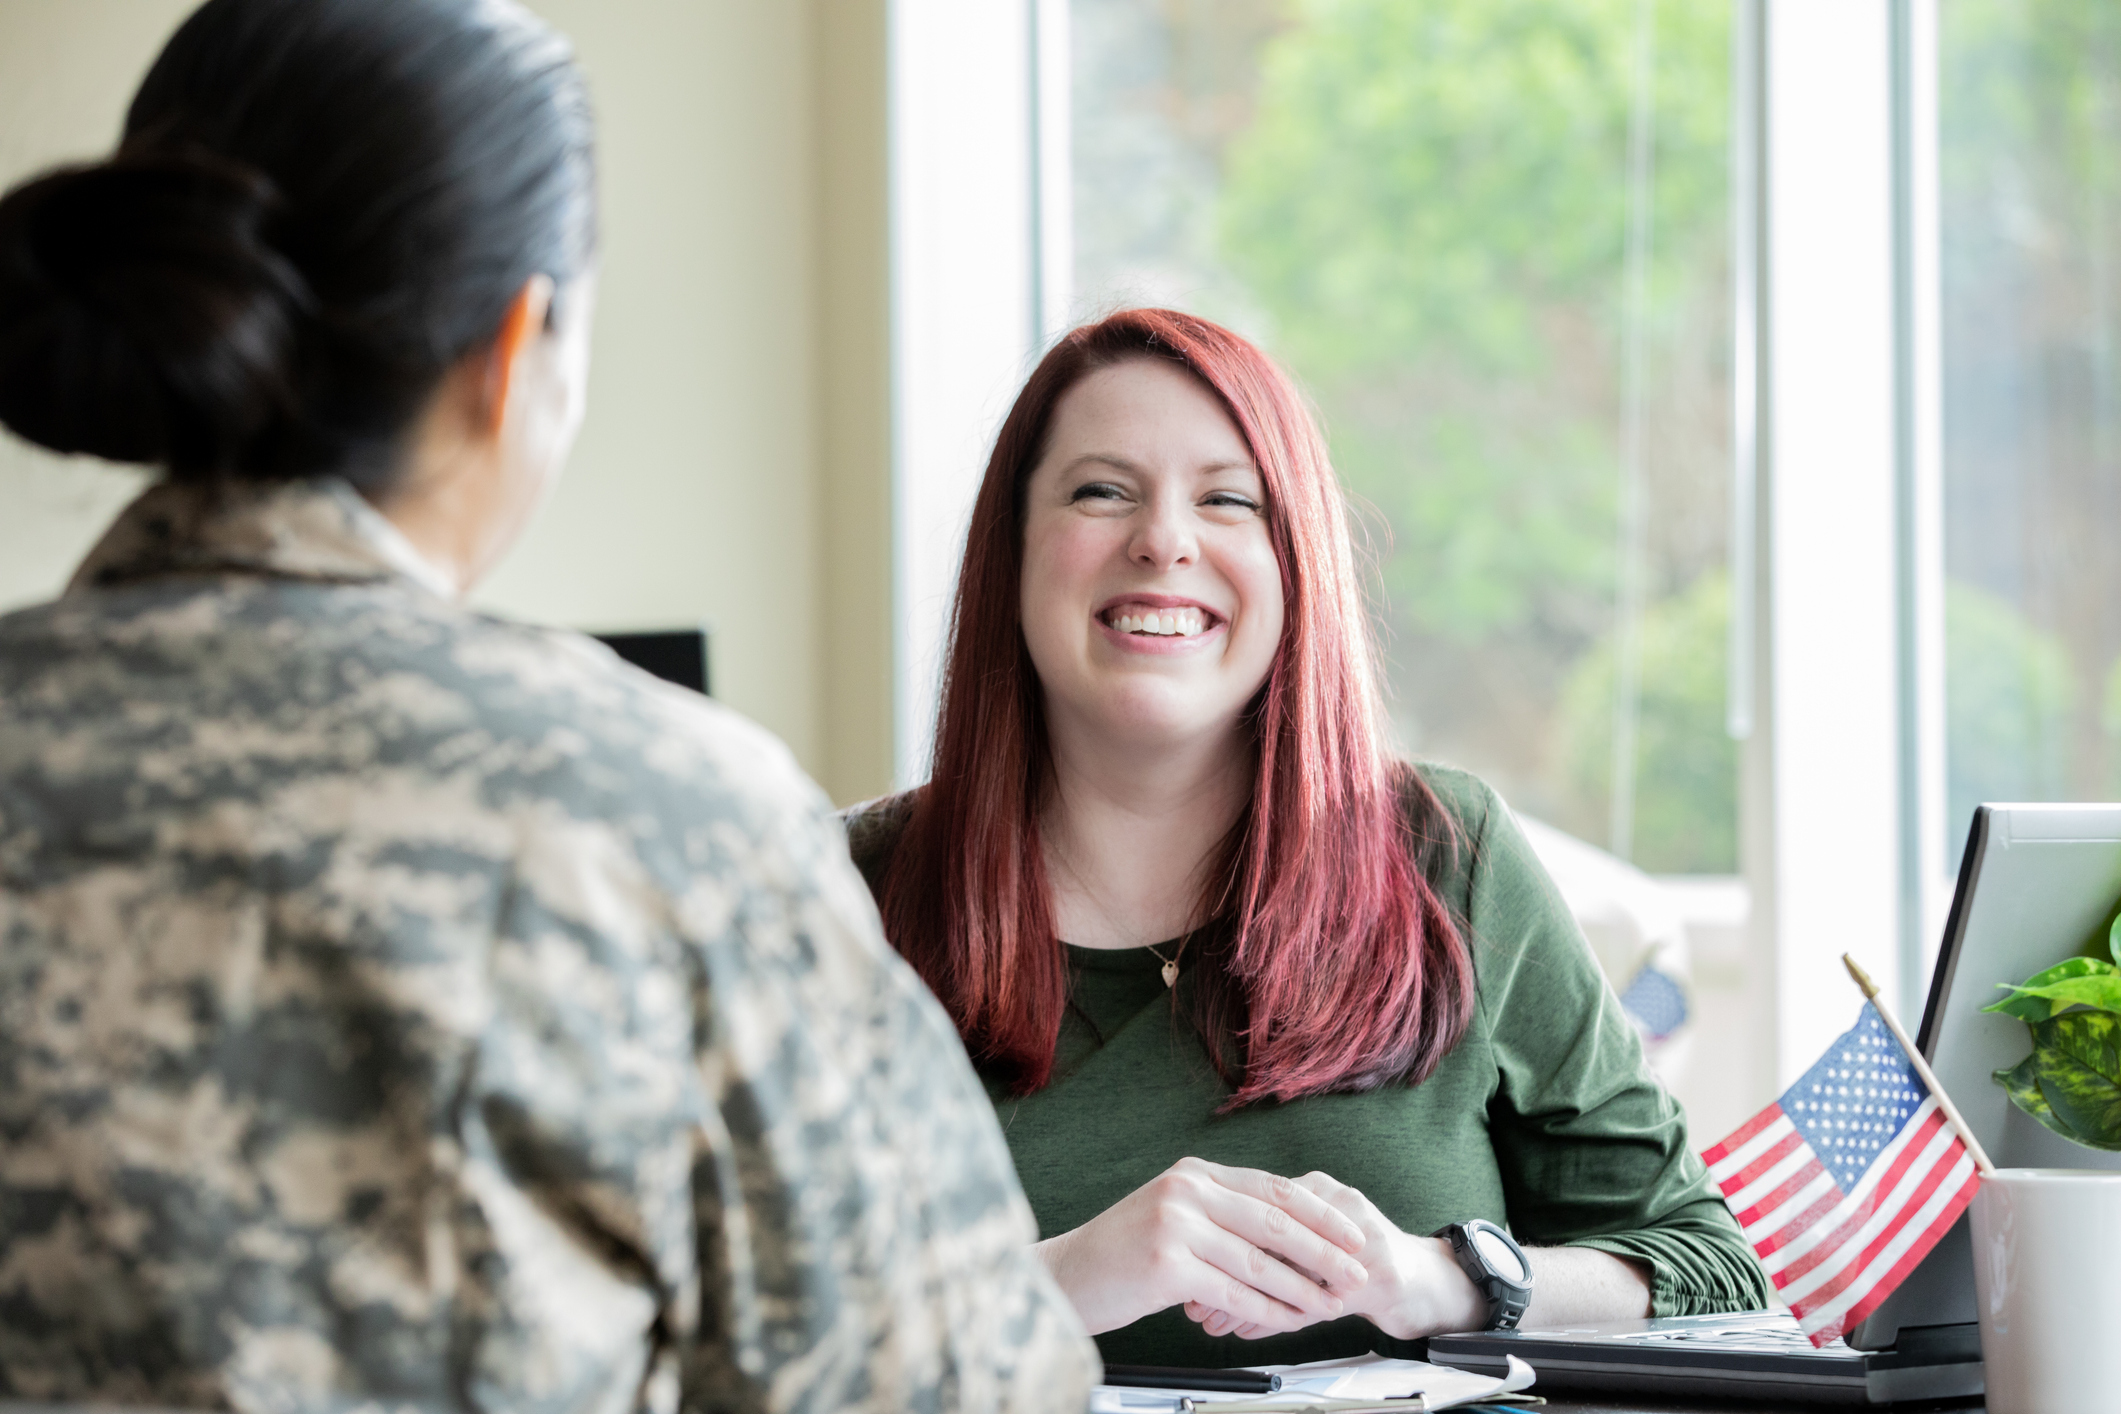 Woman speaking to military woman over desk